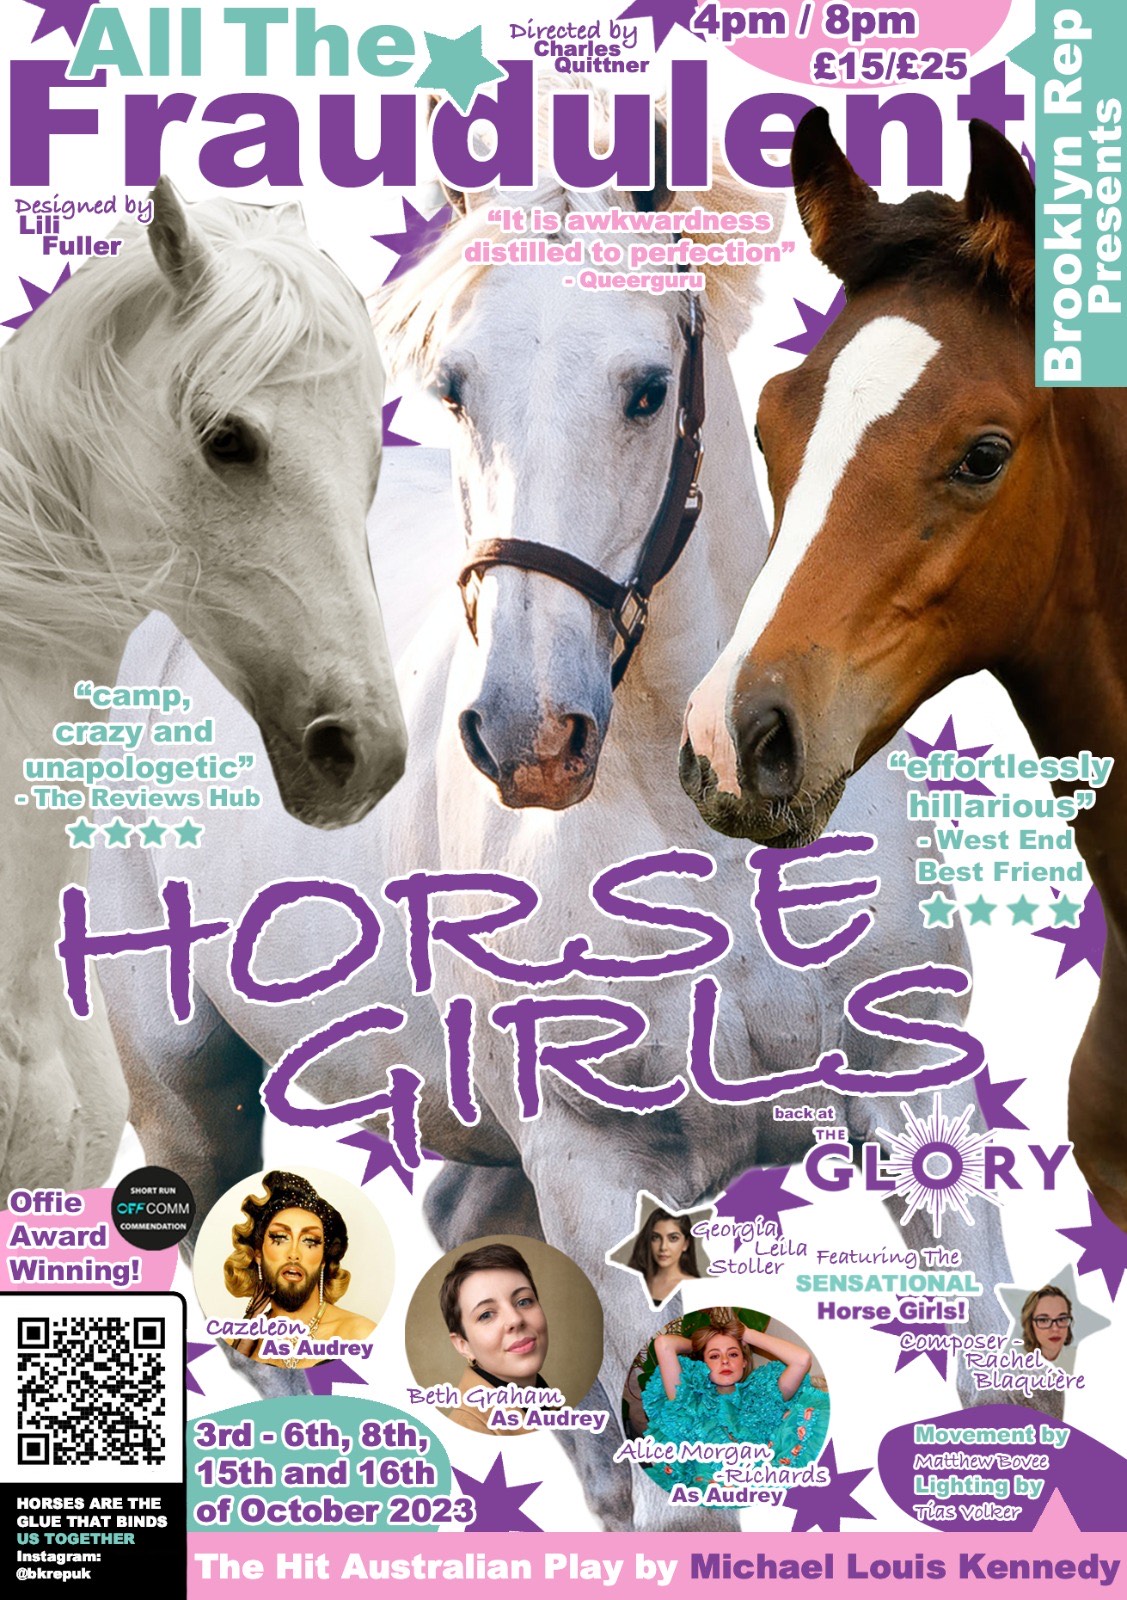 THEATRE: All the Fraudulent Horse Girls